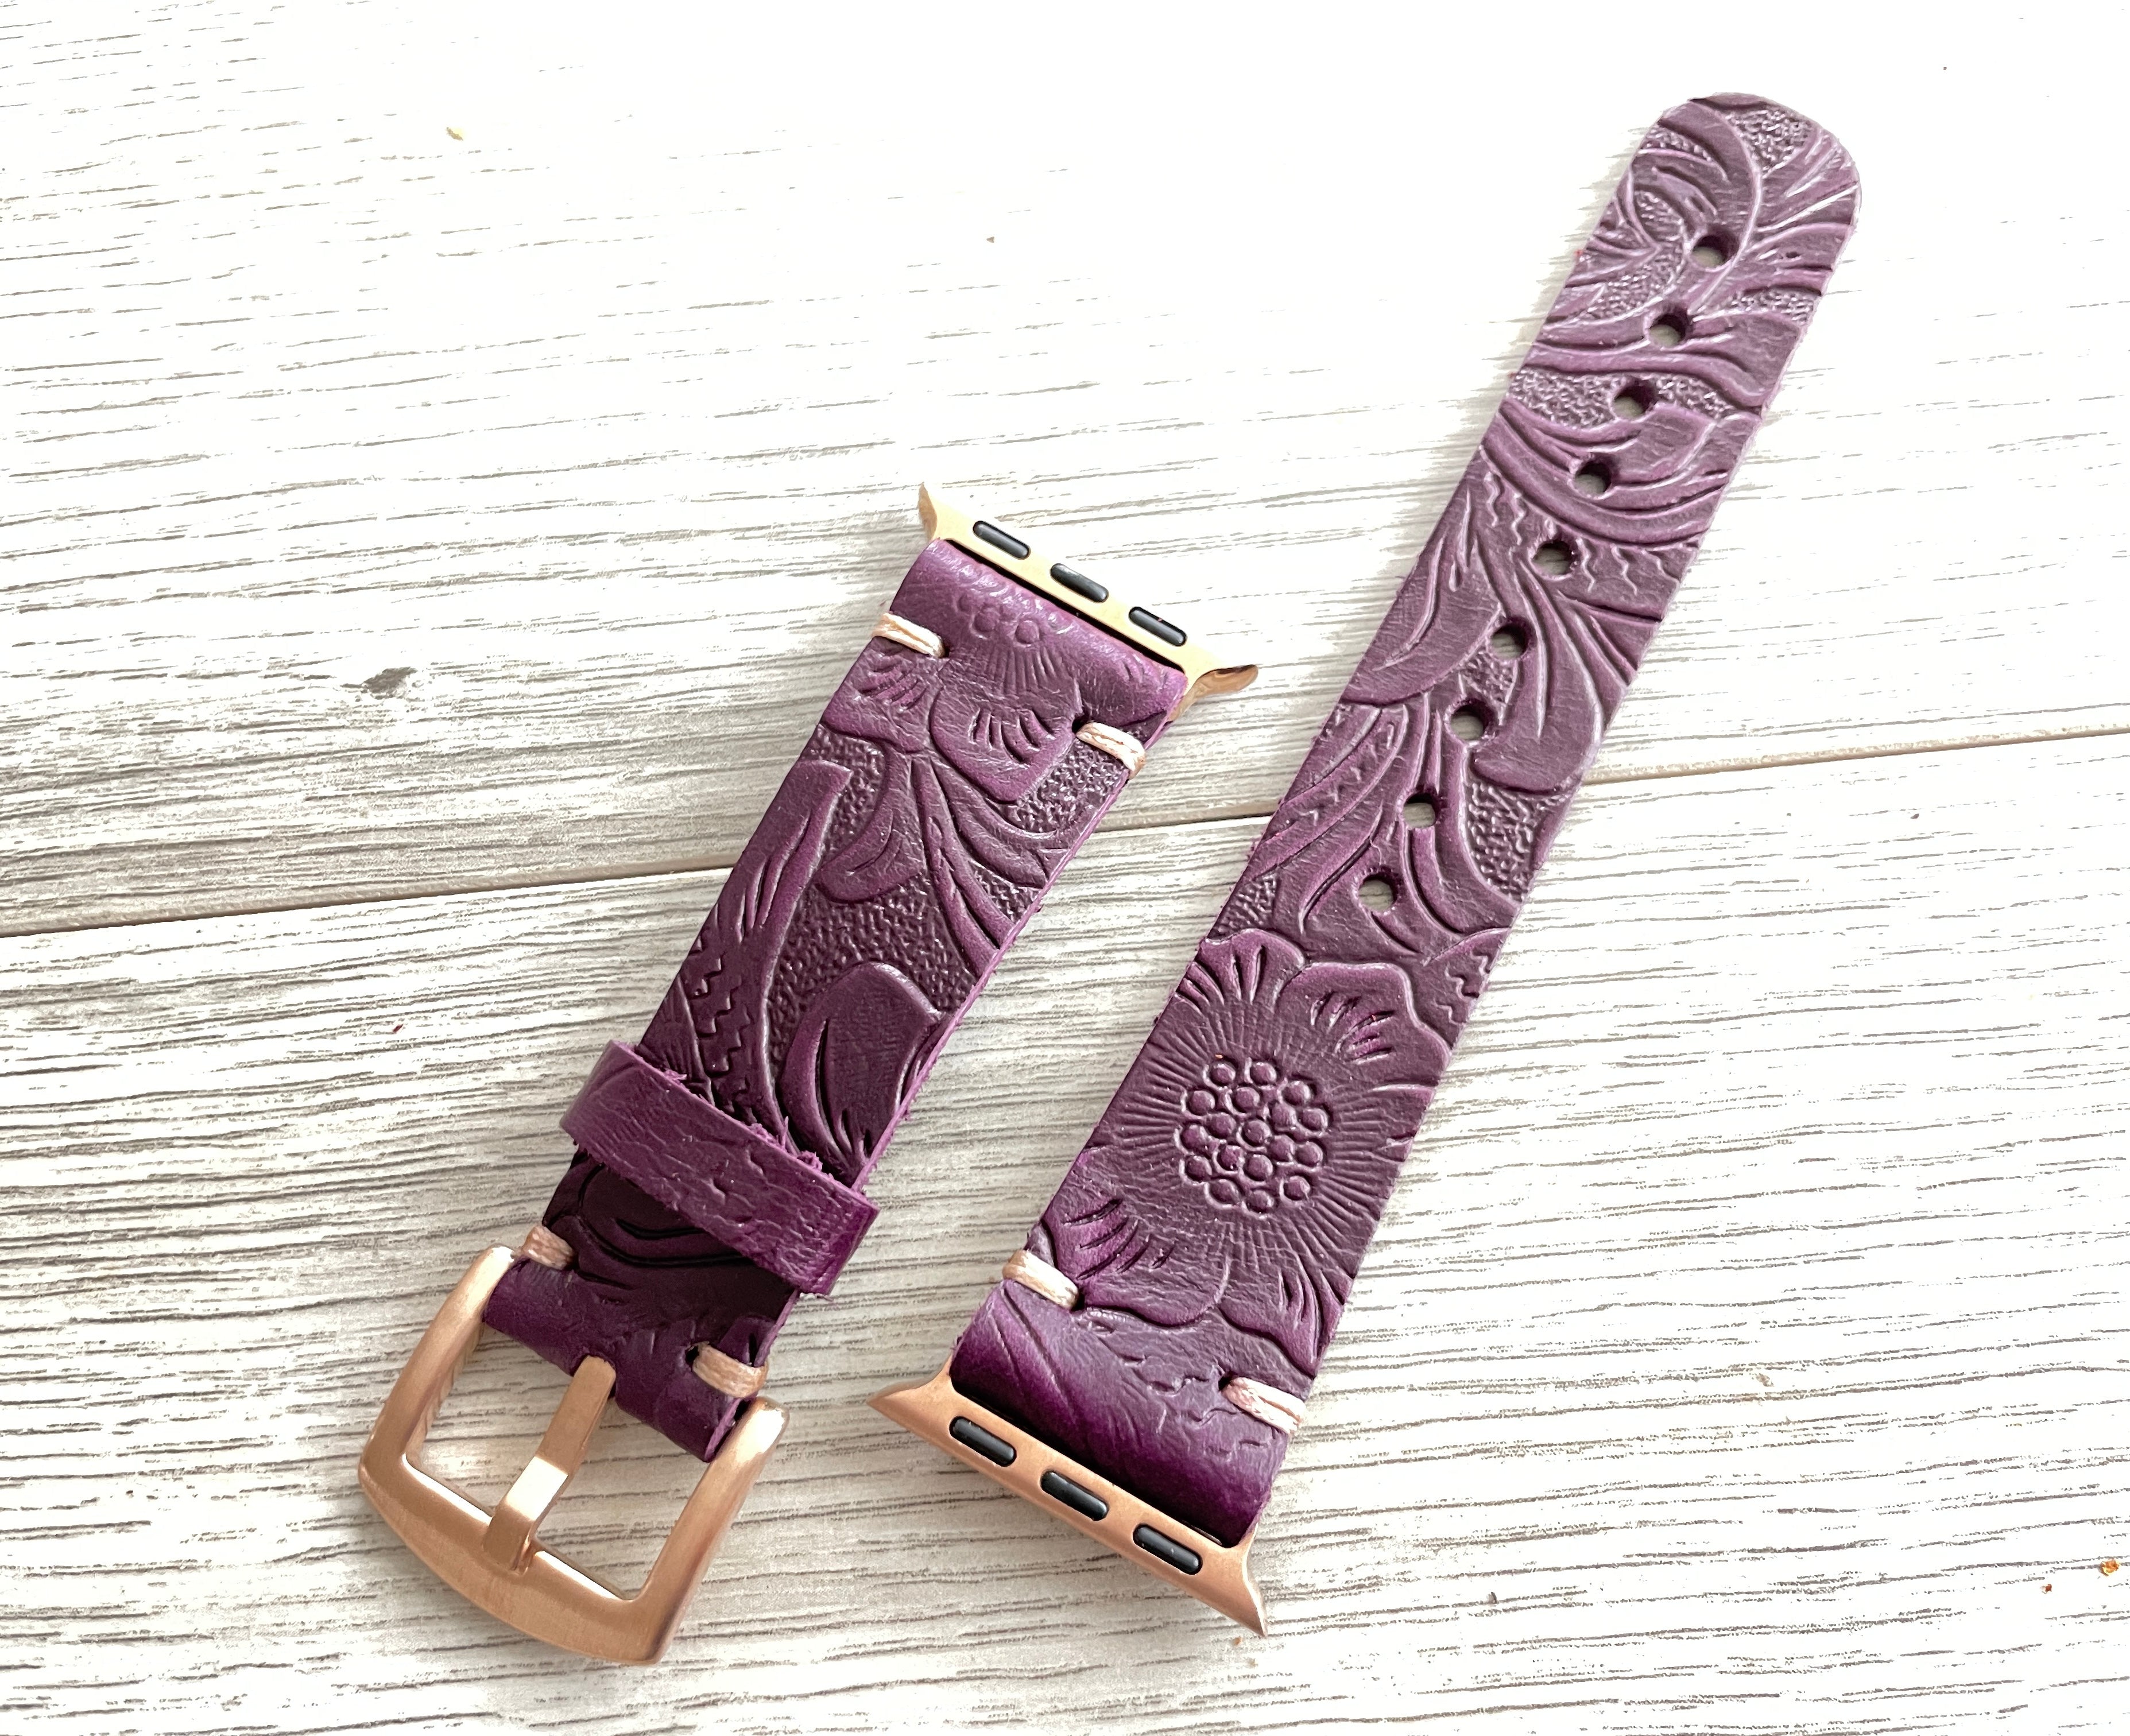 Leather Apple Watch Band Series 1/2/3/4/5/6/7/8 